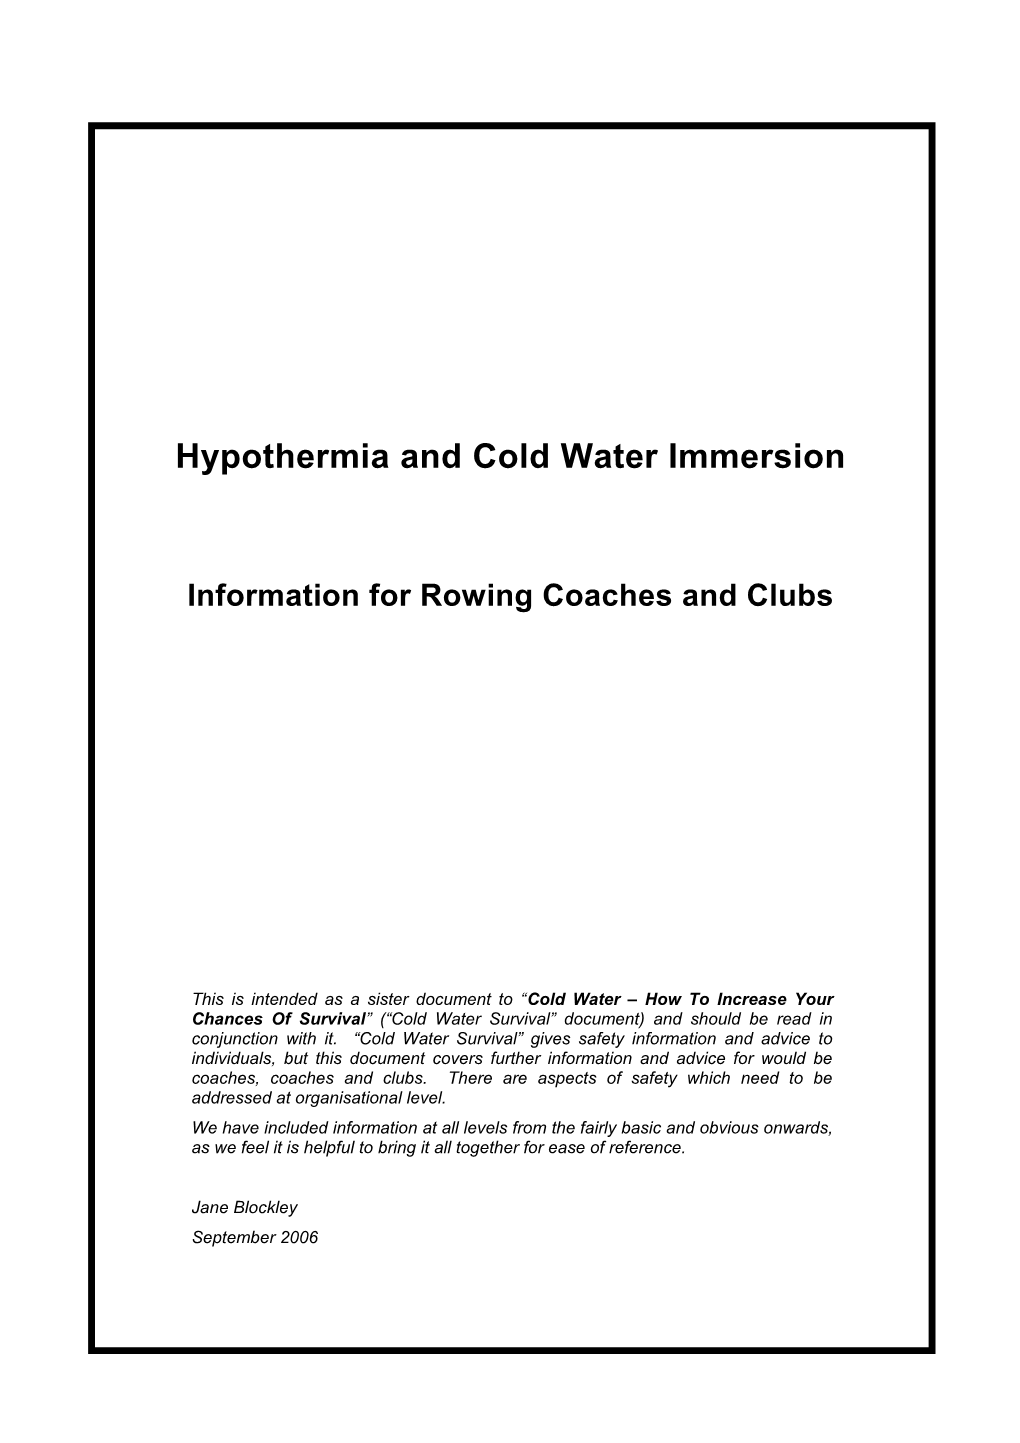 Cold Water Immersion and Hypothermia Advice for Coaches and Clubs